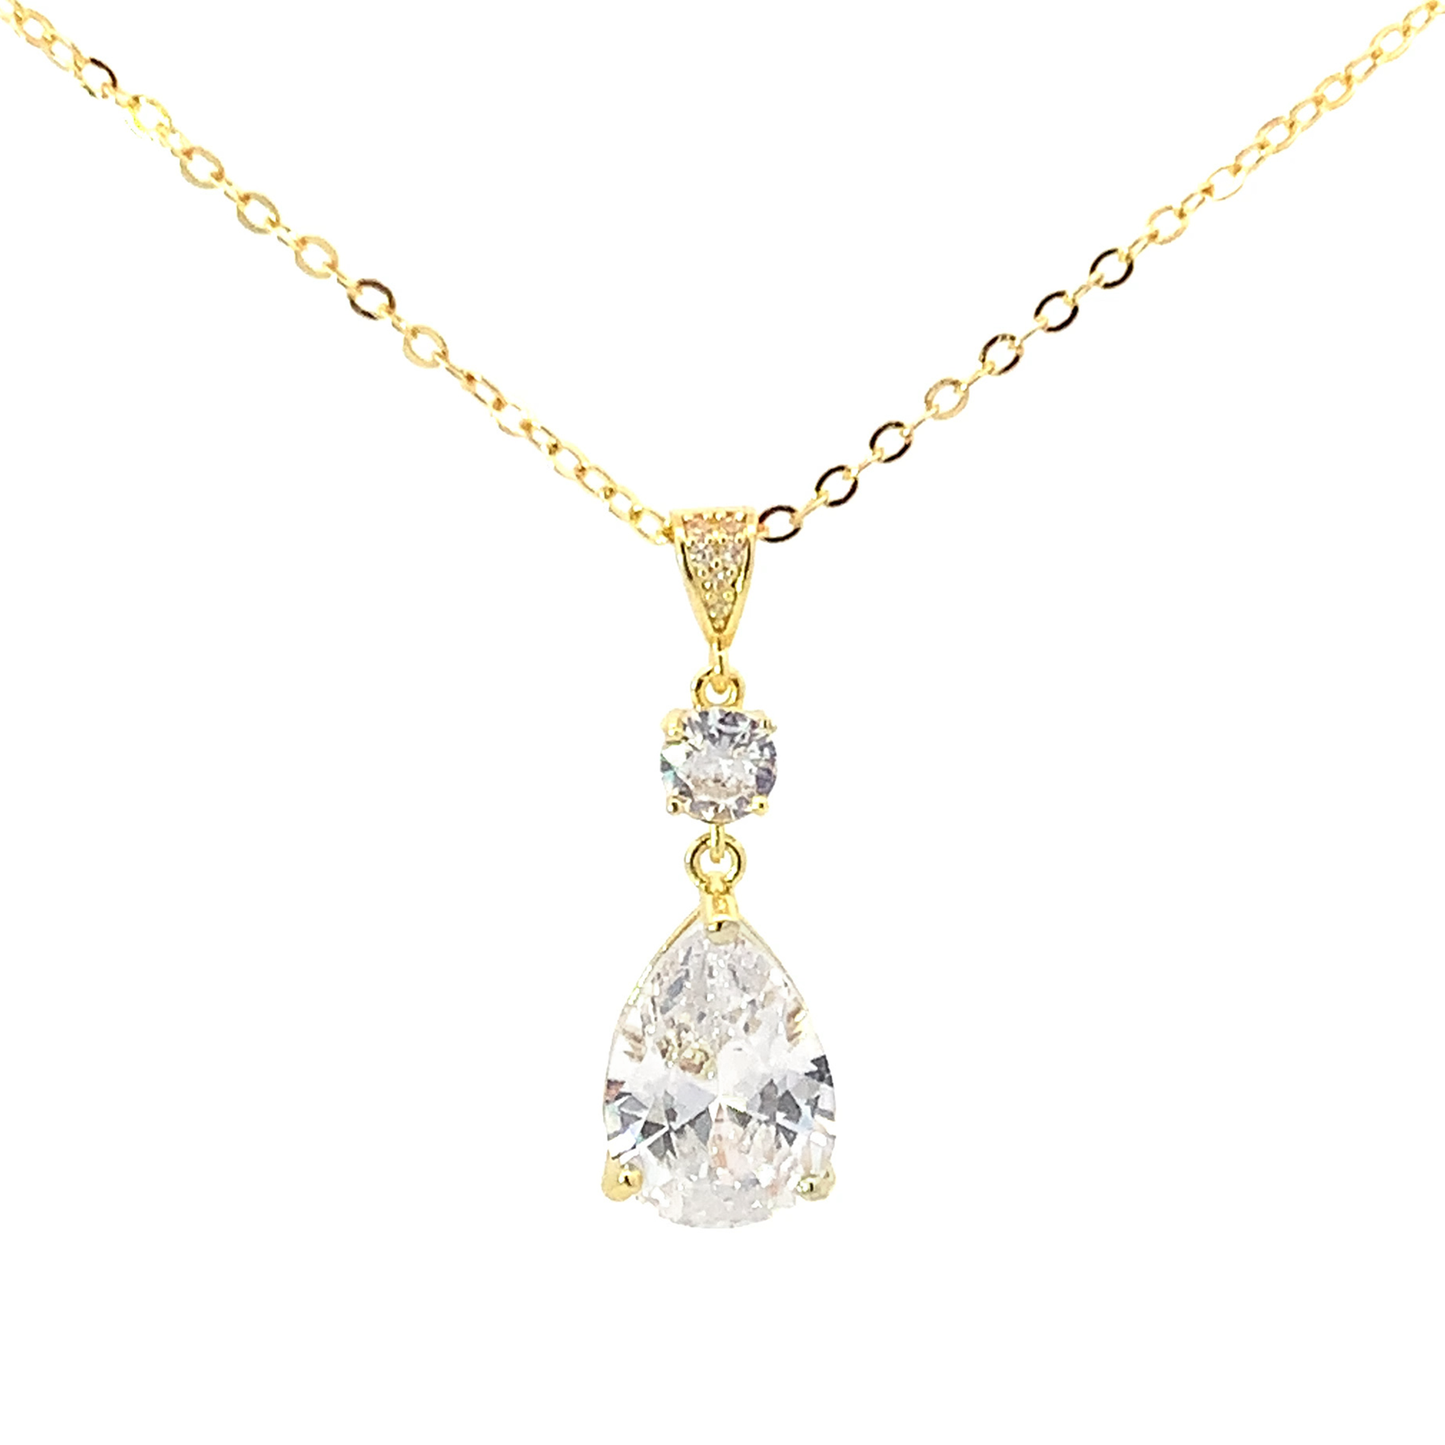 Crystal pear bridal pendant necklace gold